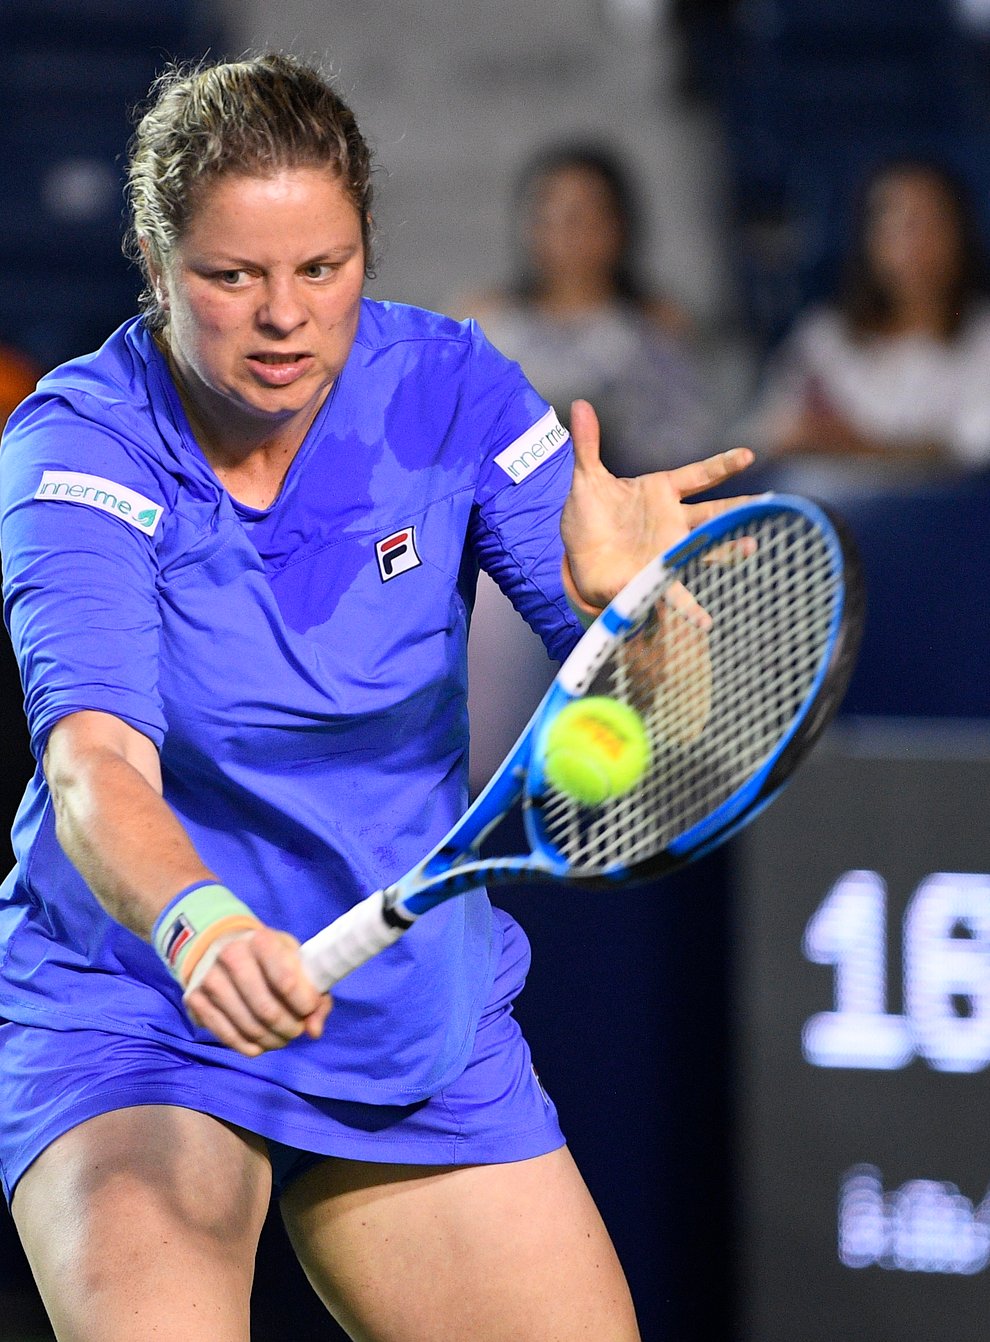 Kim Clijsters is out of the Western & Southern Open